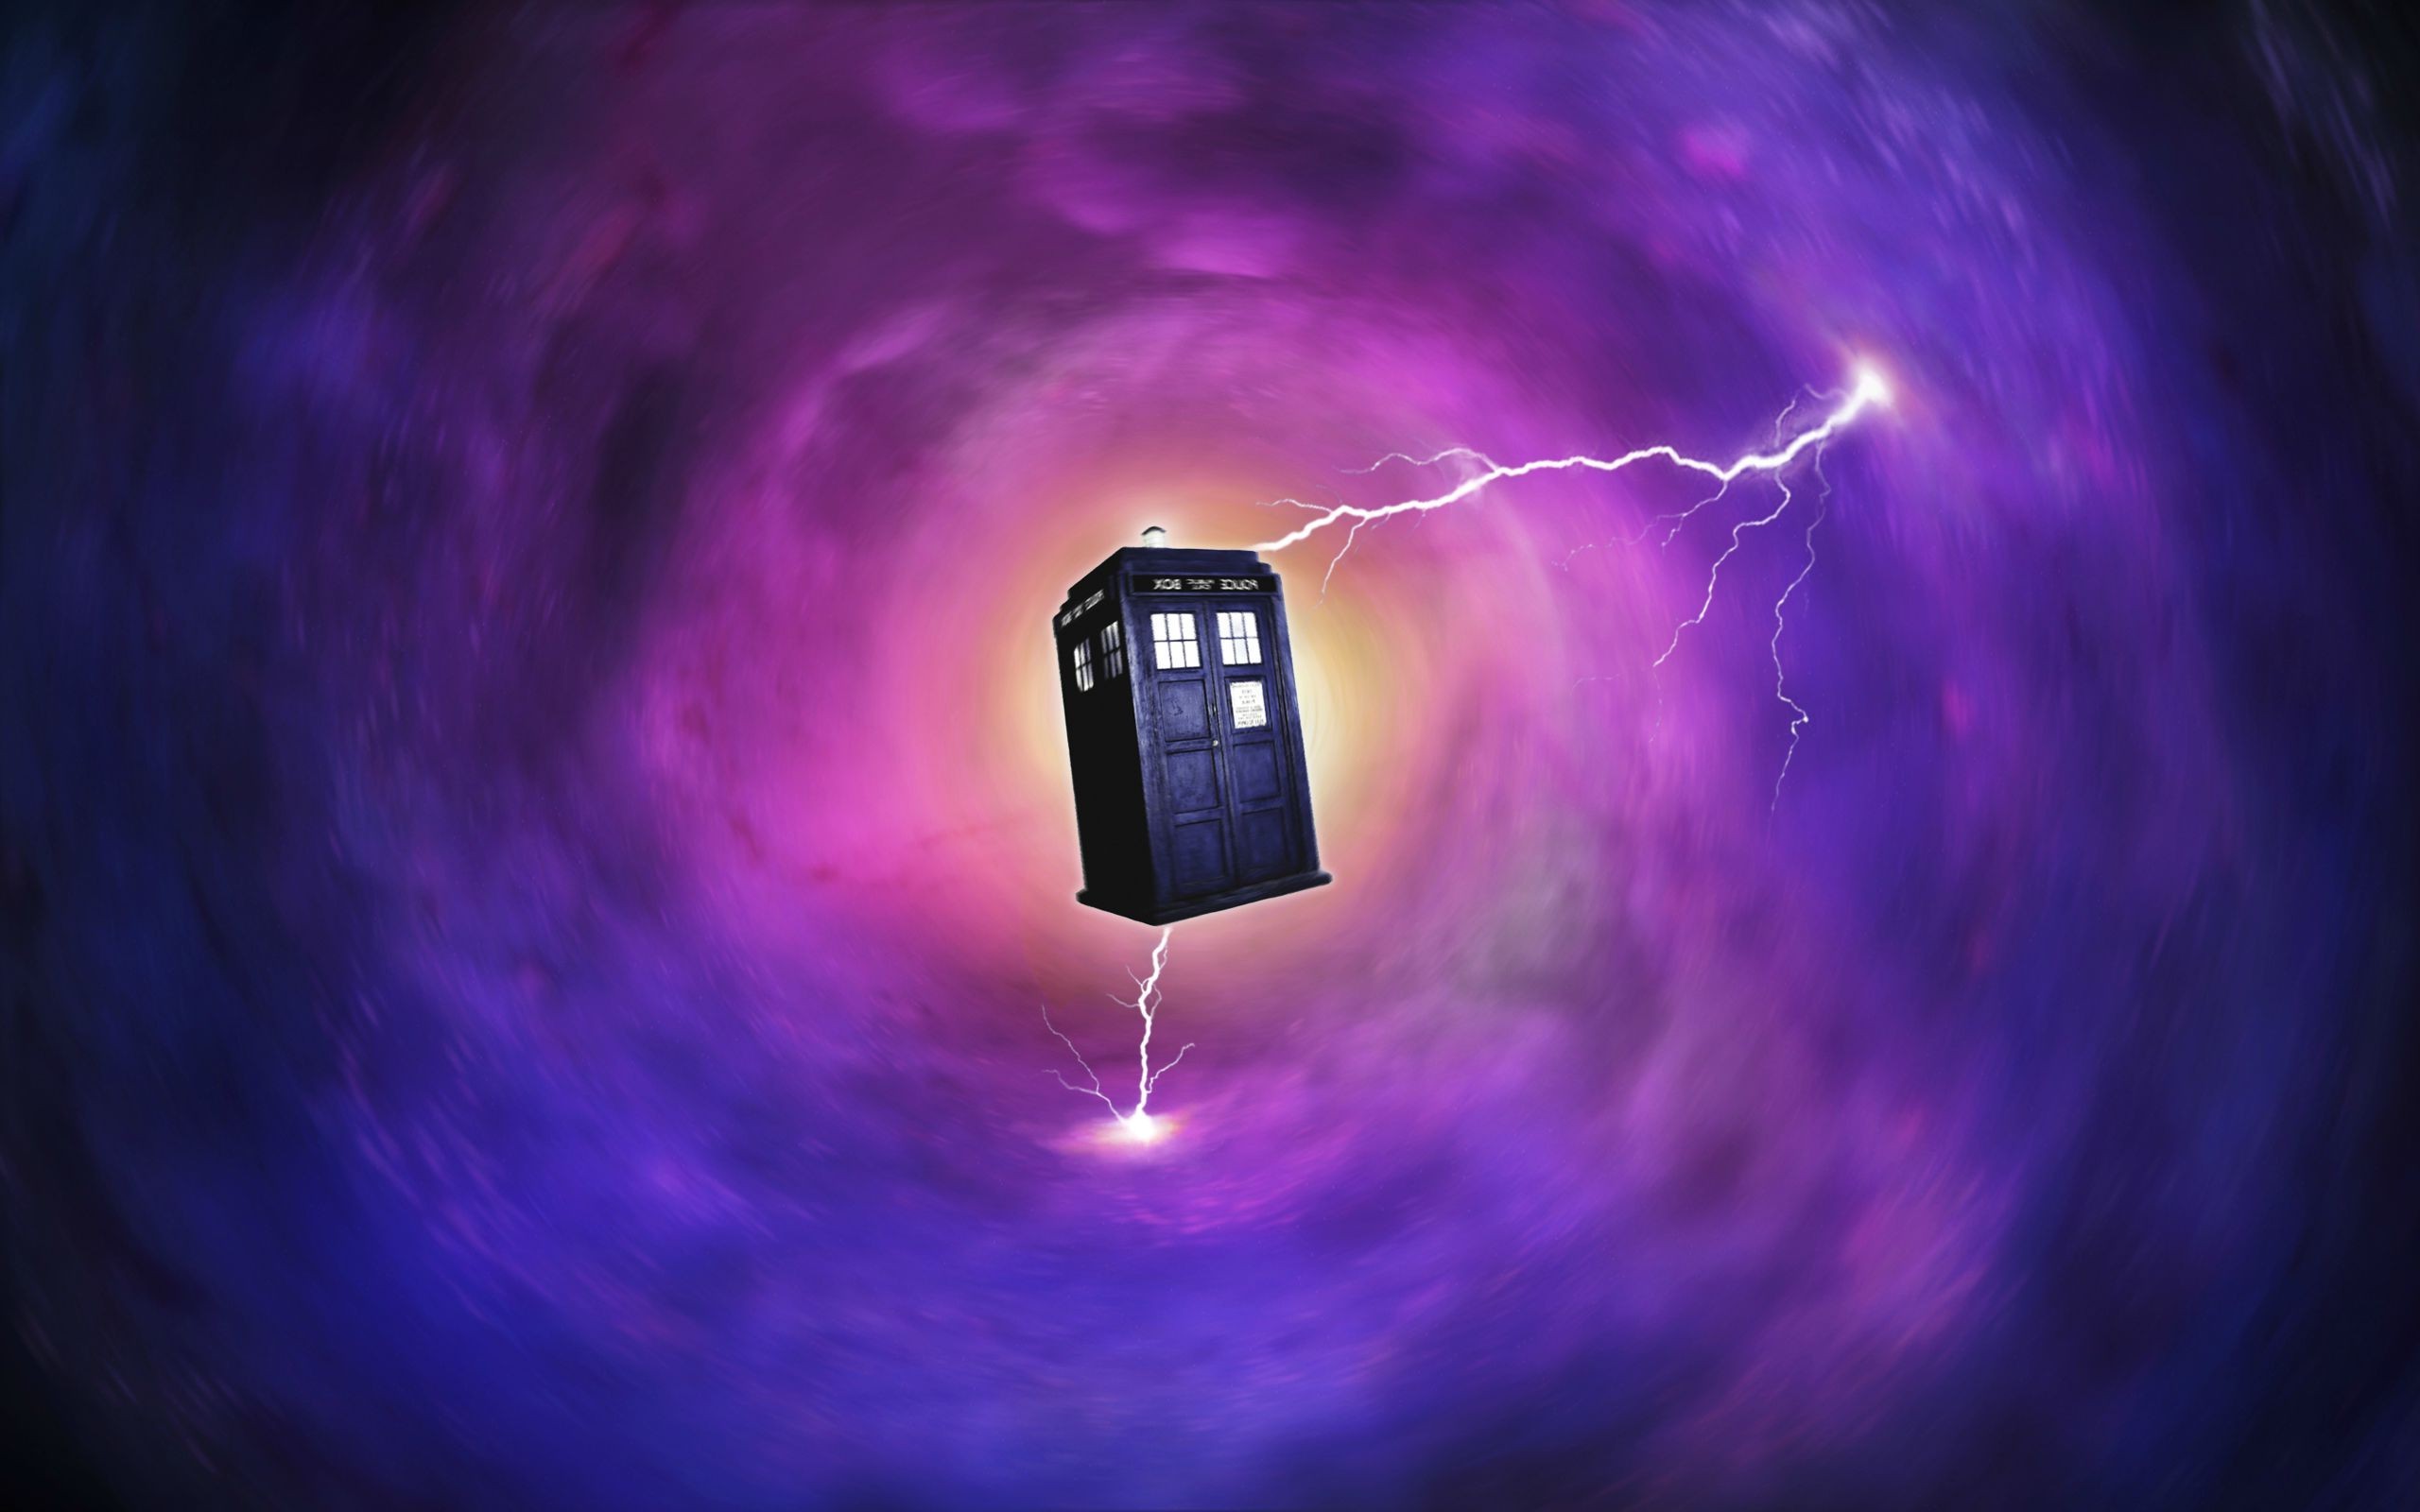 Doctor Who Space Background - HD Wallpaper 